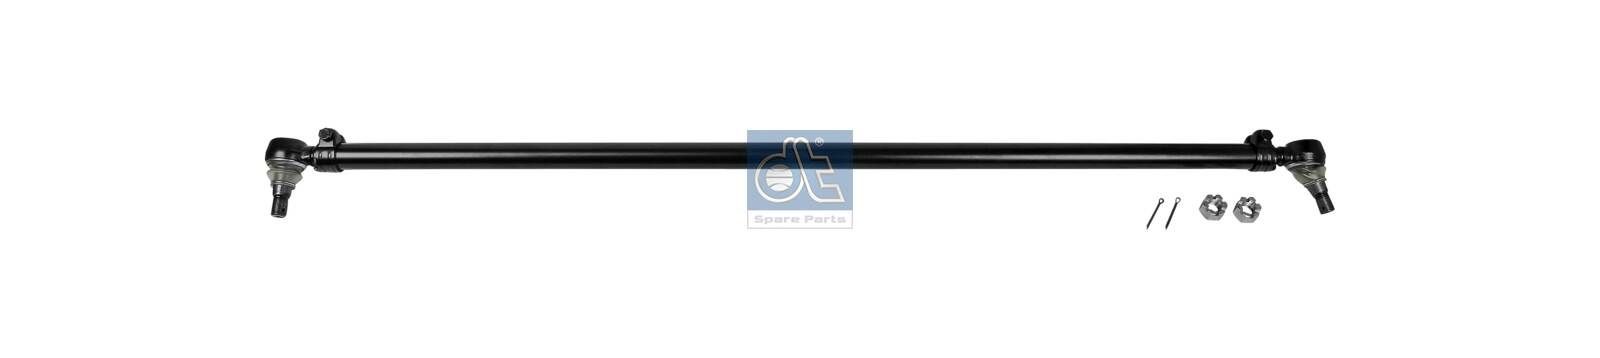 DT Spare Parts 2.53116 Rod Assembly 7420581086